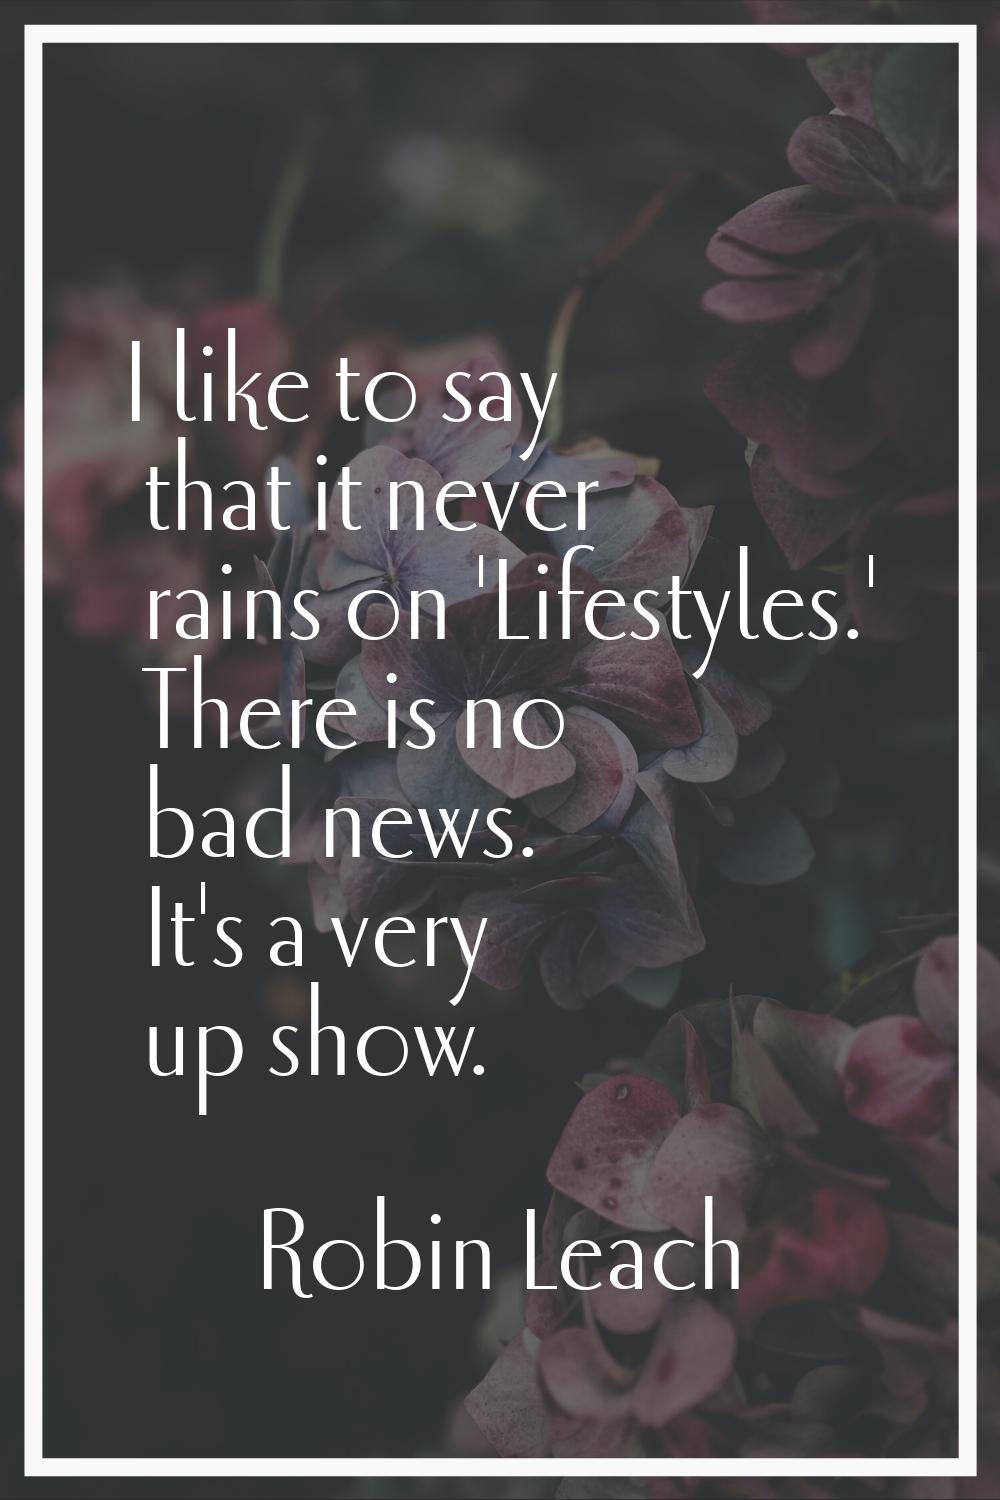 I like to say that it never rains on 'Lifestyles.' There is no bad news. It's a very up show.